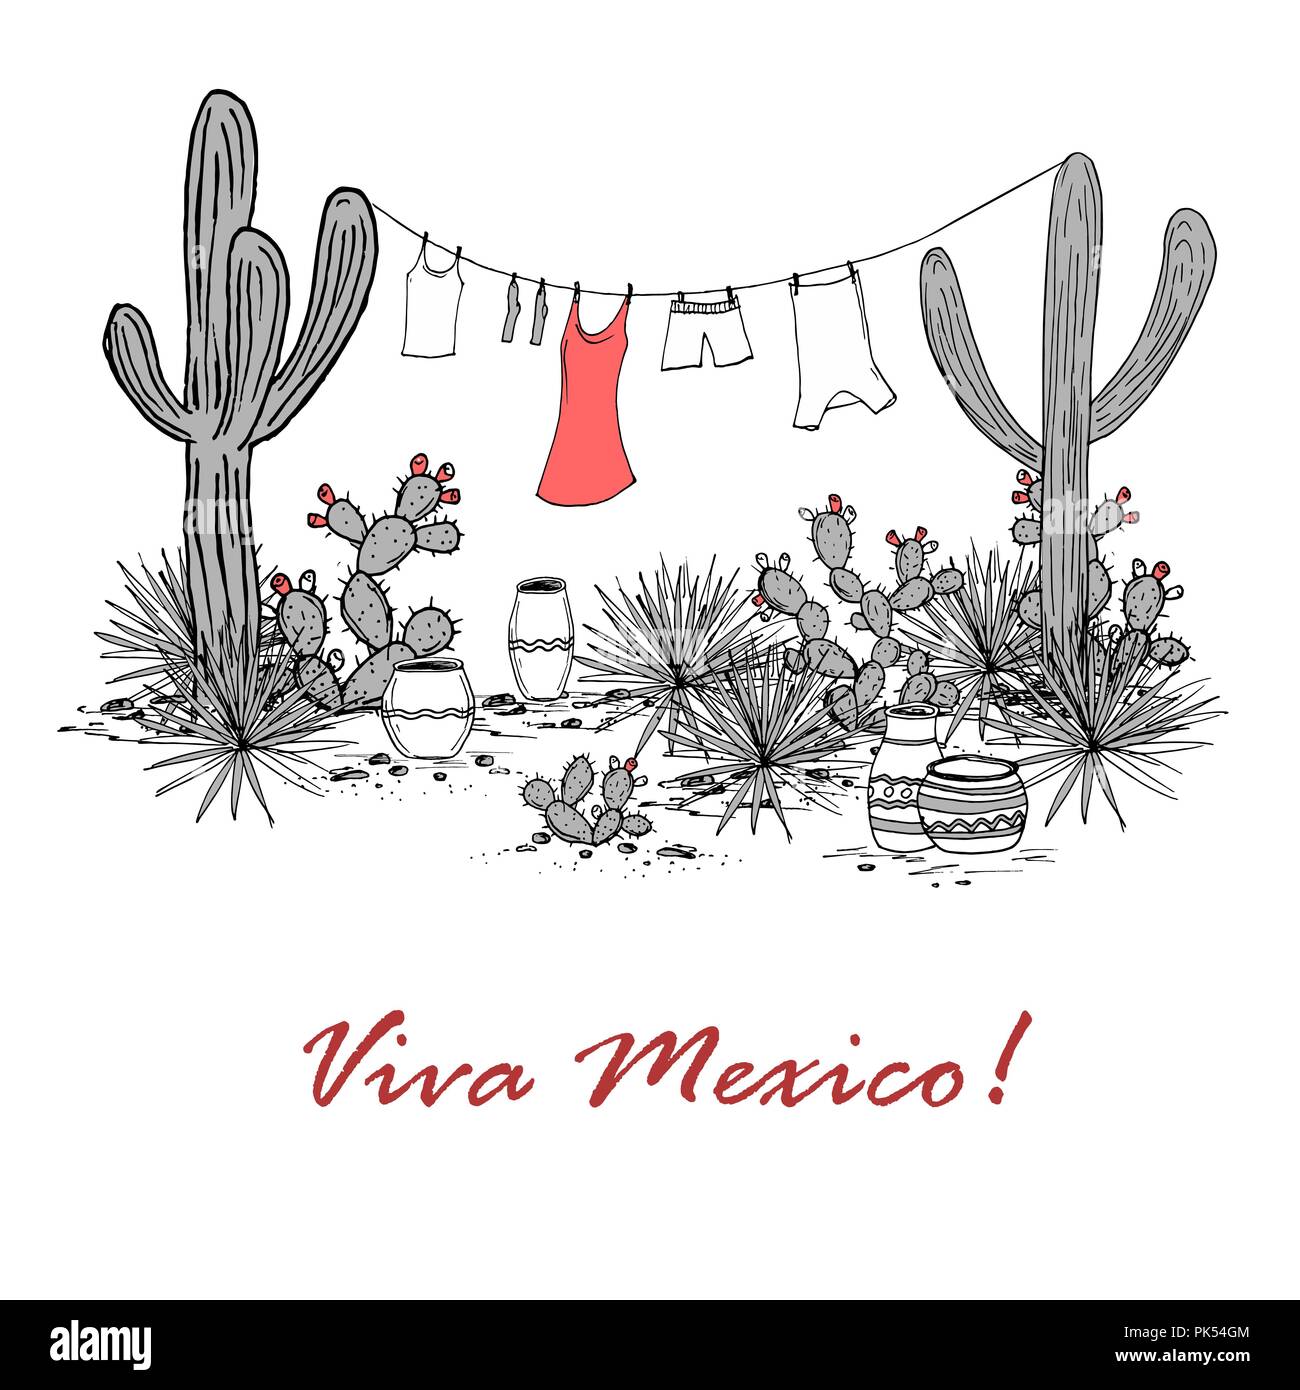 Funny hand drawn illustraytion with jars, saguaro, blue agave, prickly pear, and laundry hanging on a clothesline. Latin American background. Mexican  Stock Vector